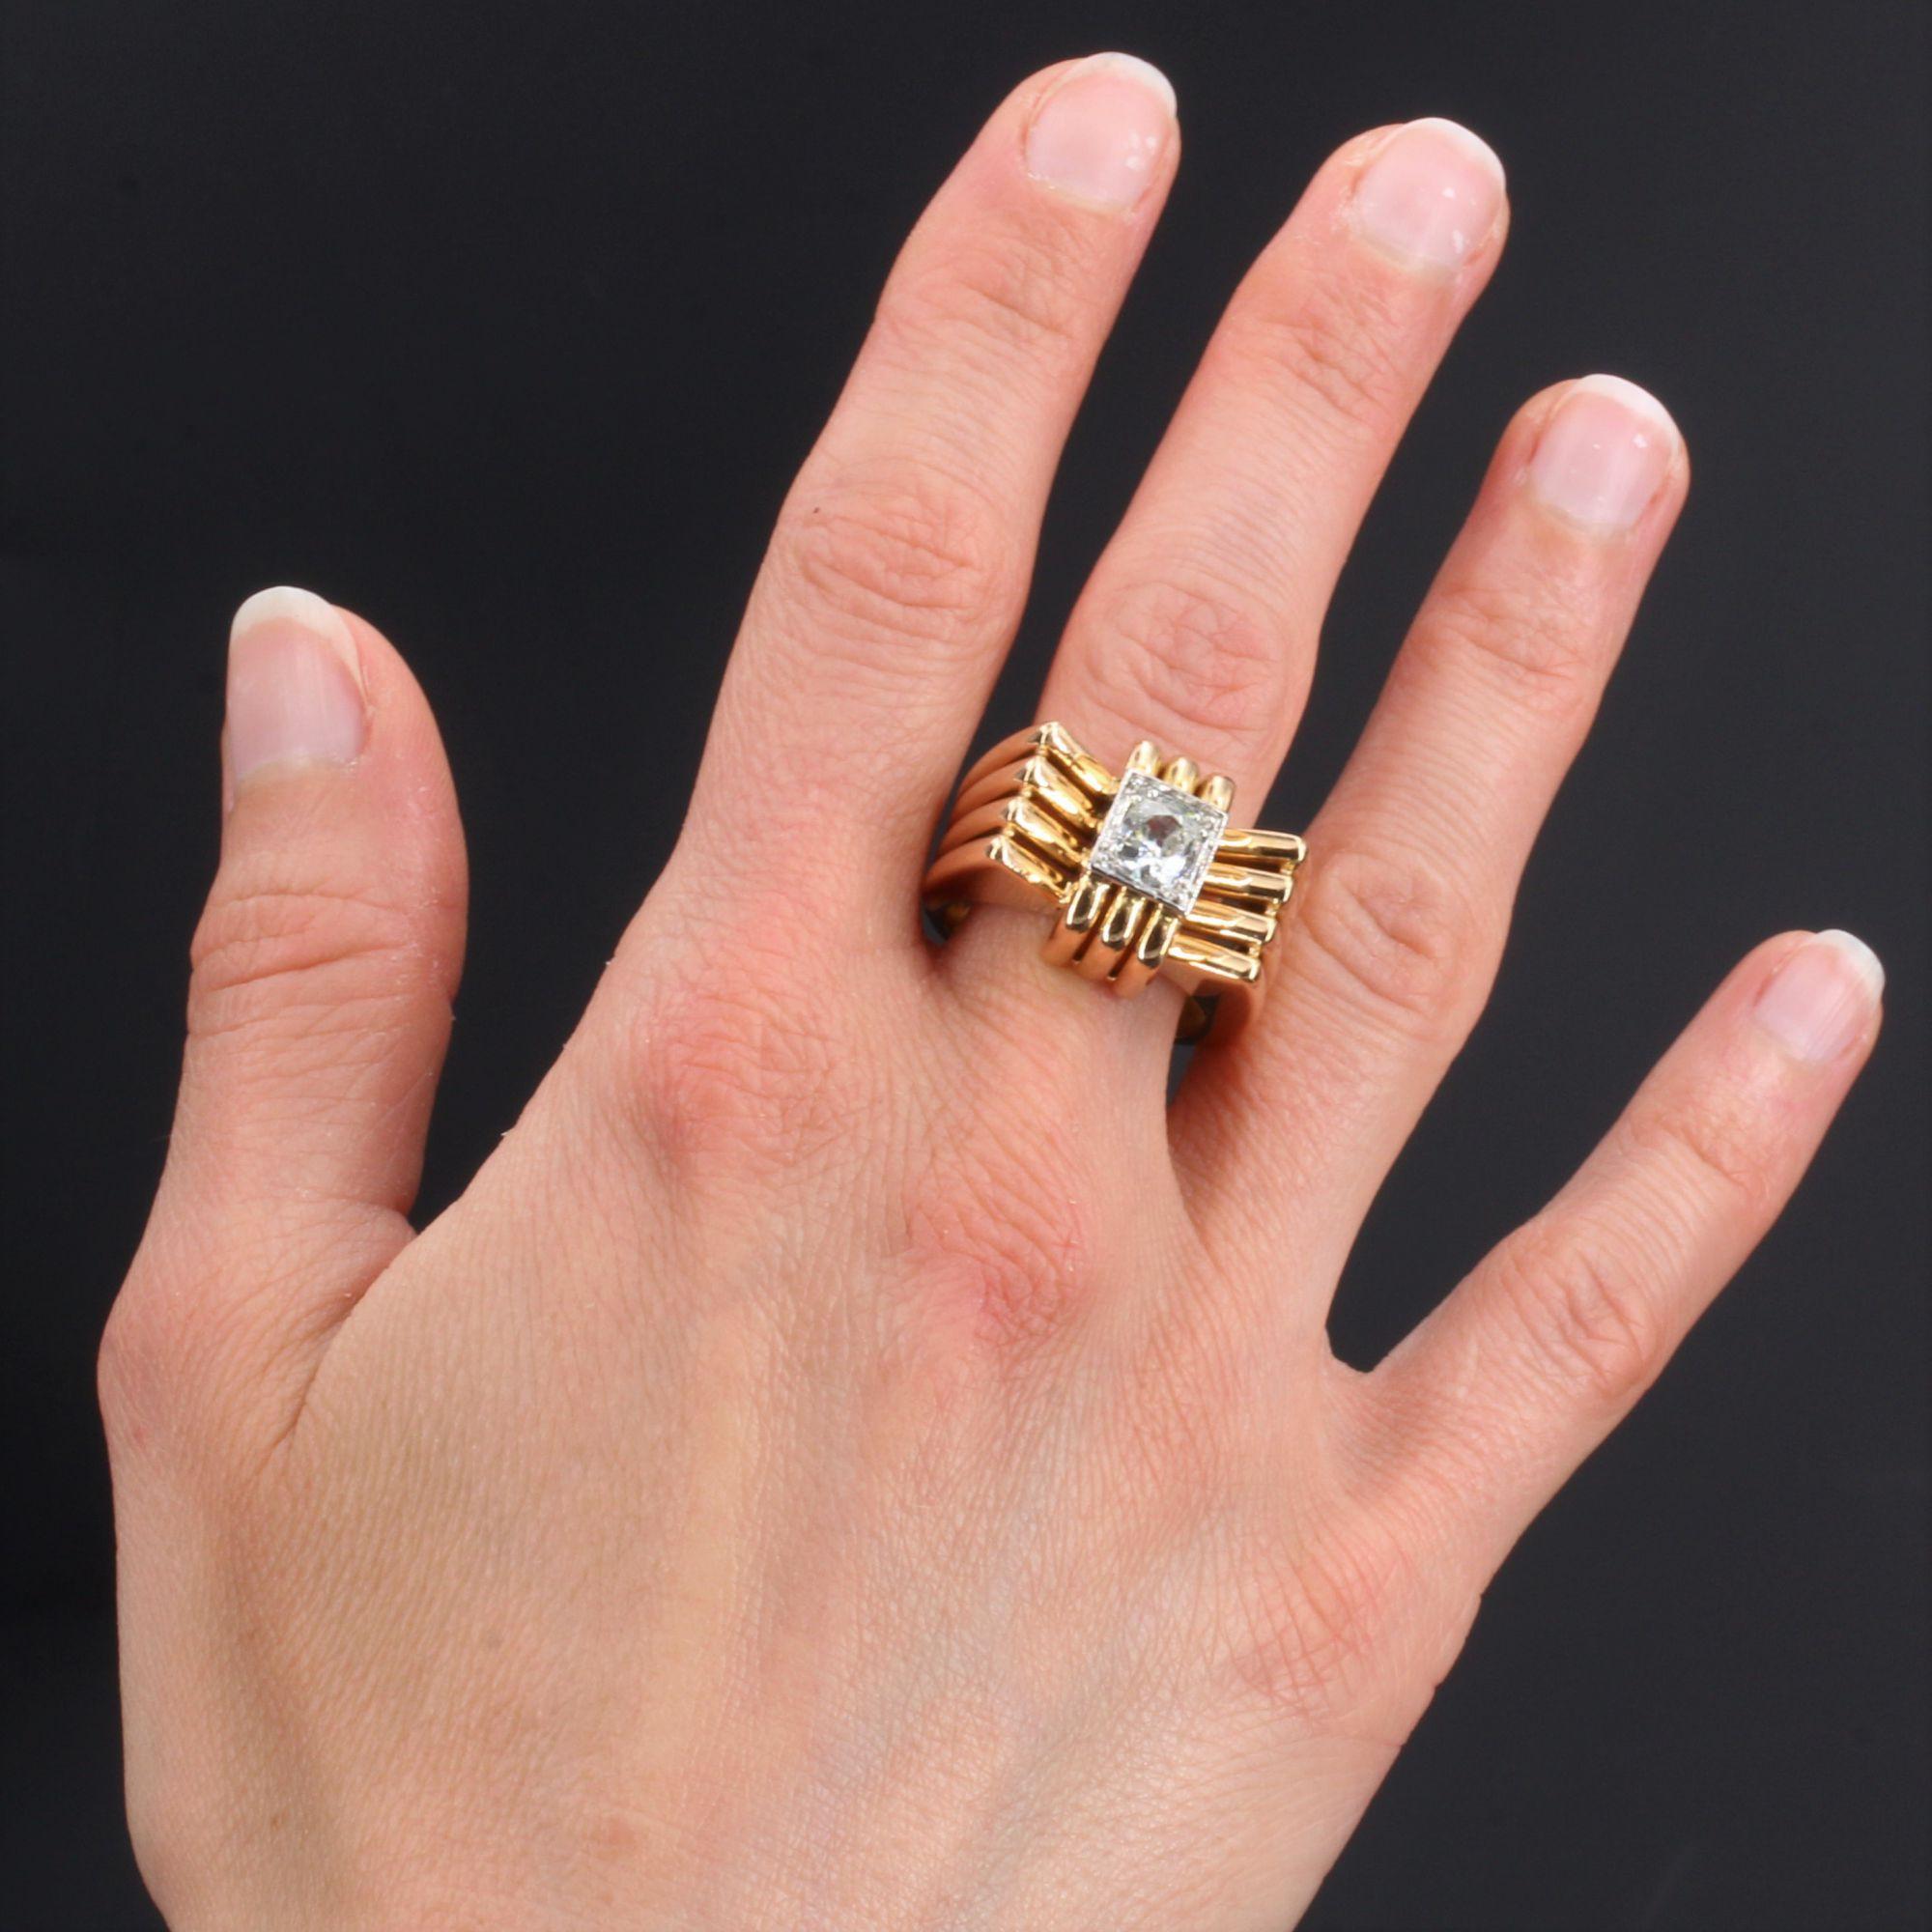 Ring in 18 karat yellow gold, eagle head hallmark and platinum, dog head hallmark.
Important tank ring, it is formed of four flat threads of gold, openwork between them which form the ring and the higher plate in the center of which is set, on